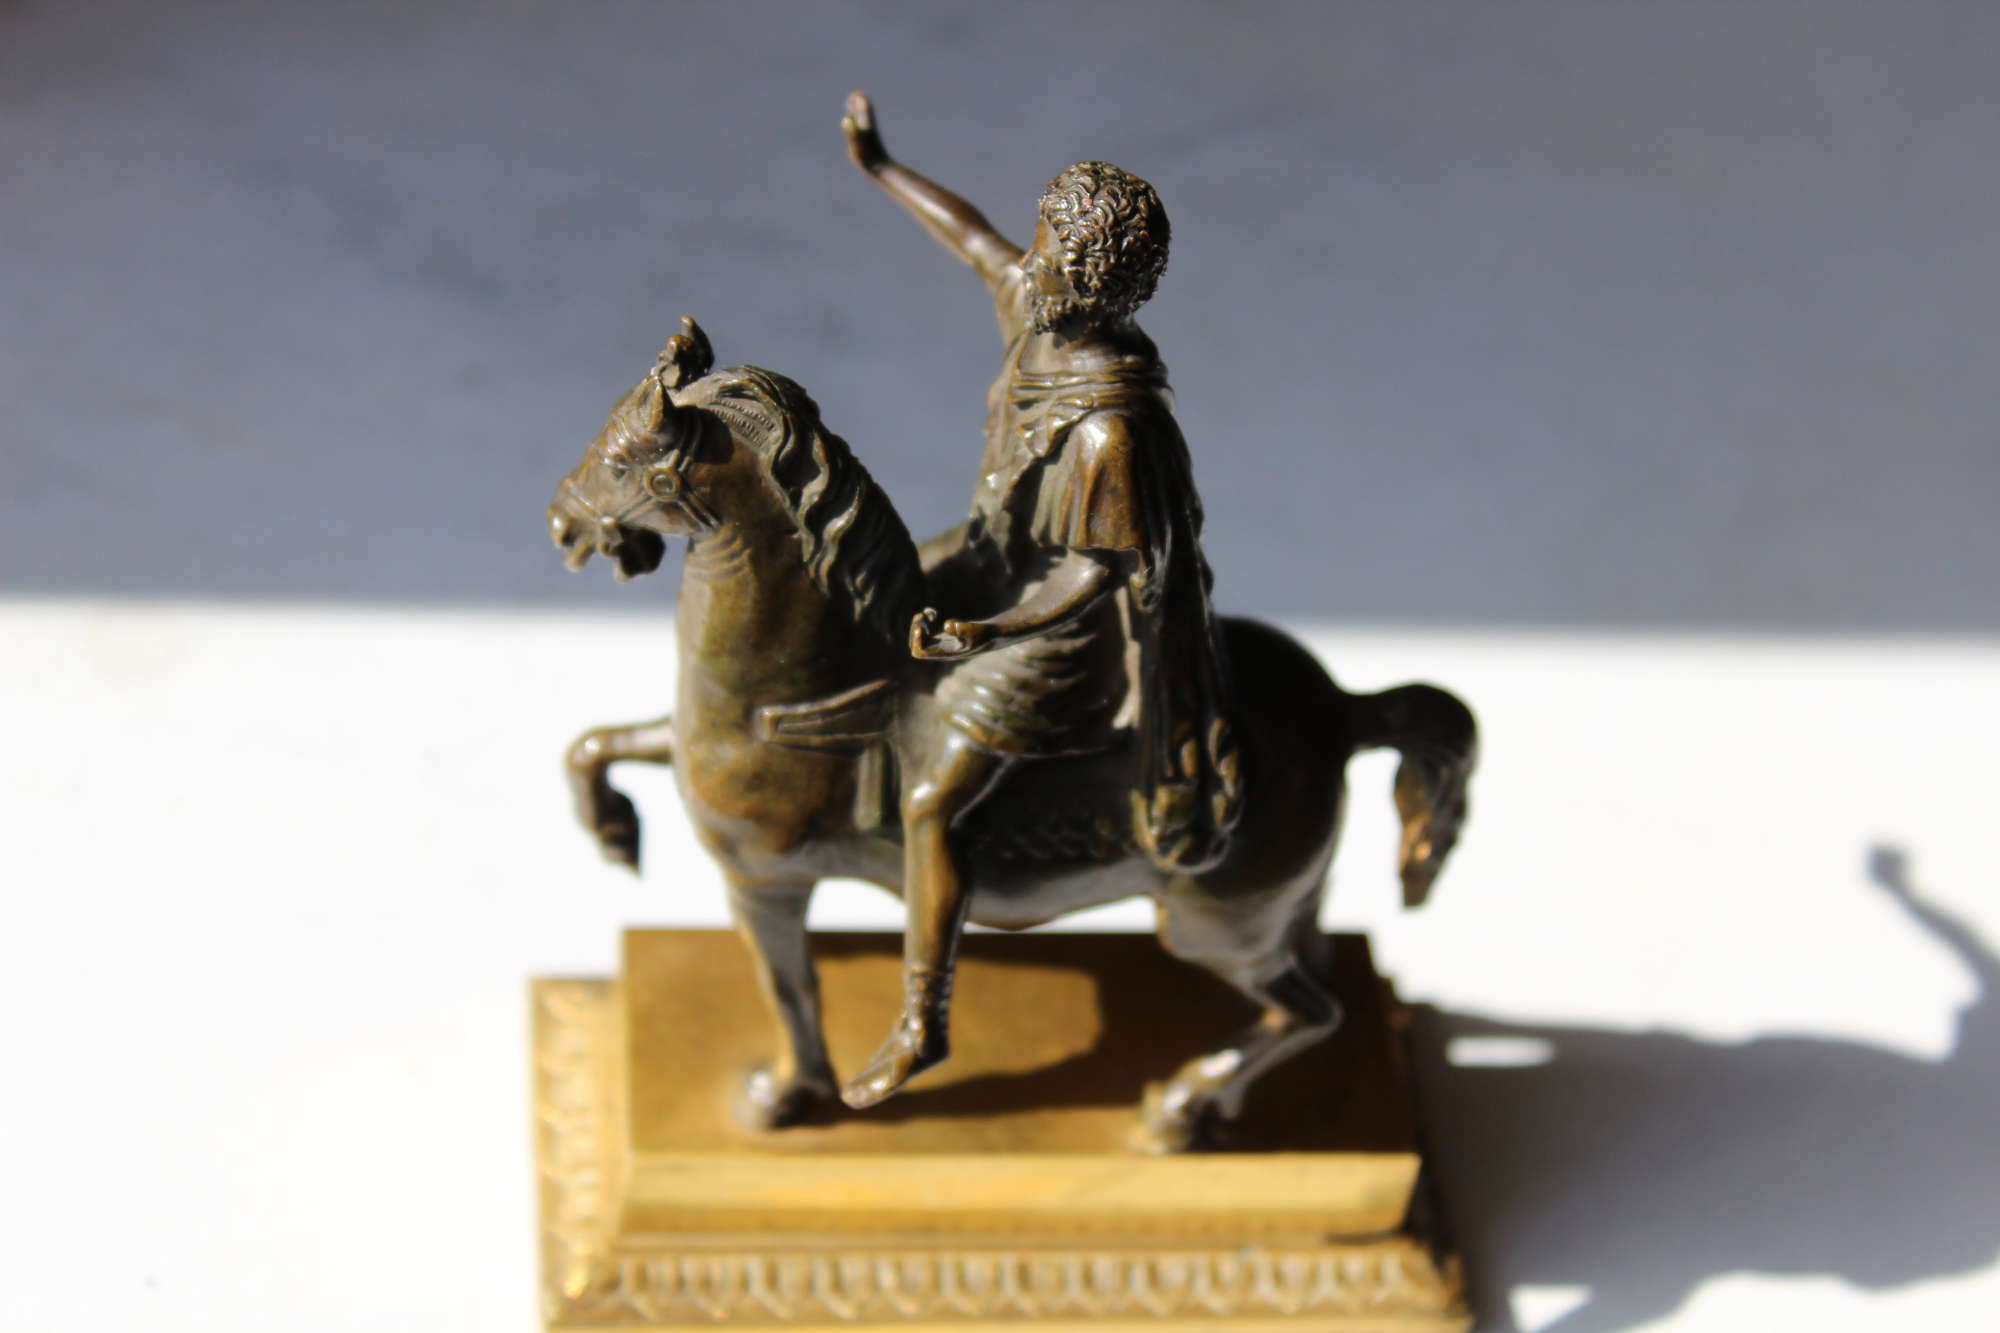 A very finely cast small Grand Tour bronze of an Equestrian